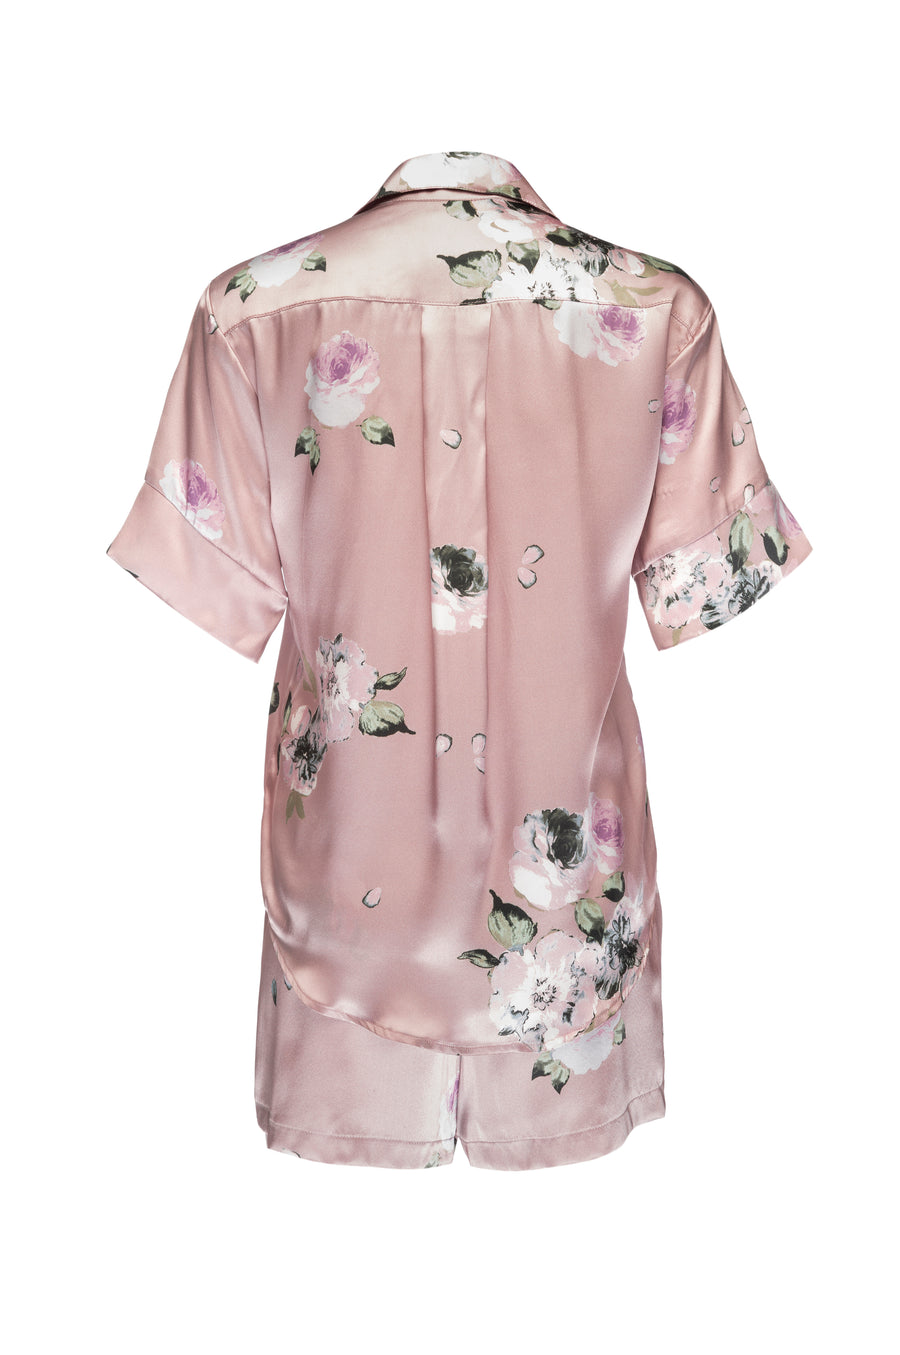 Silk Charmeuse Short Sleeved Top: Champagne Floral Print